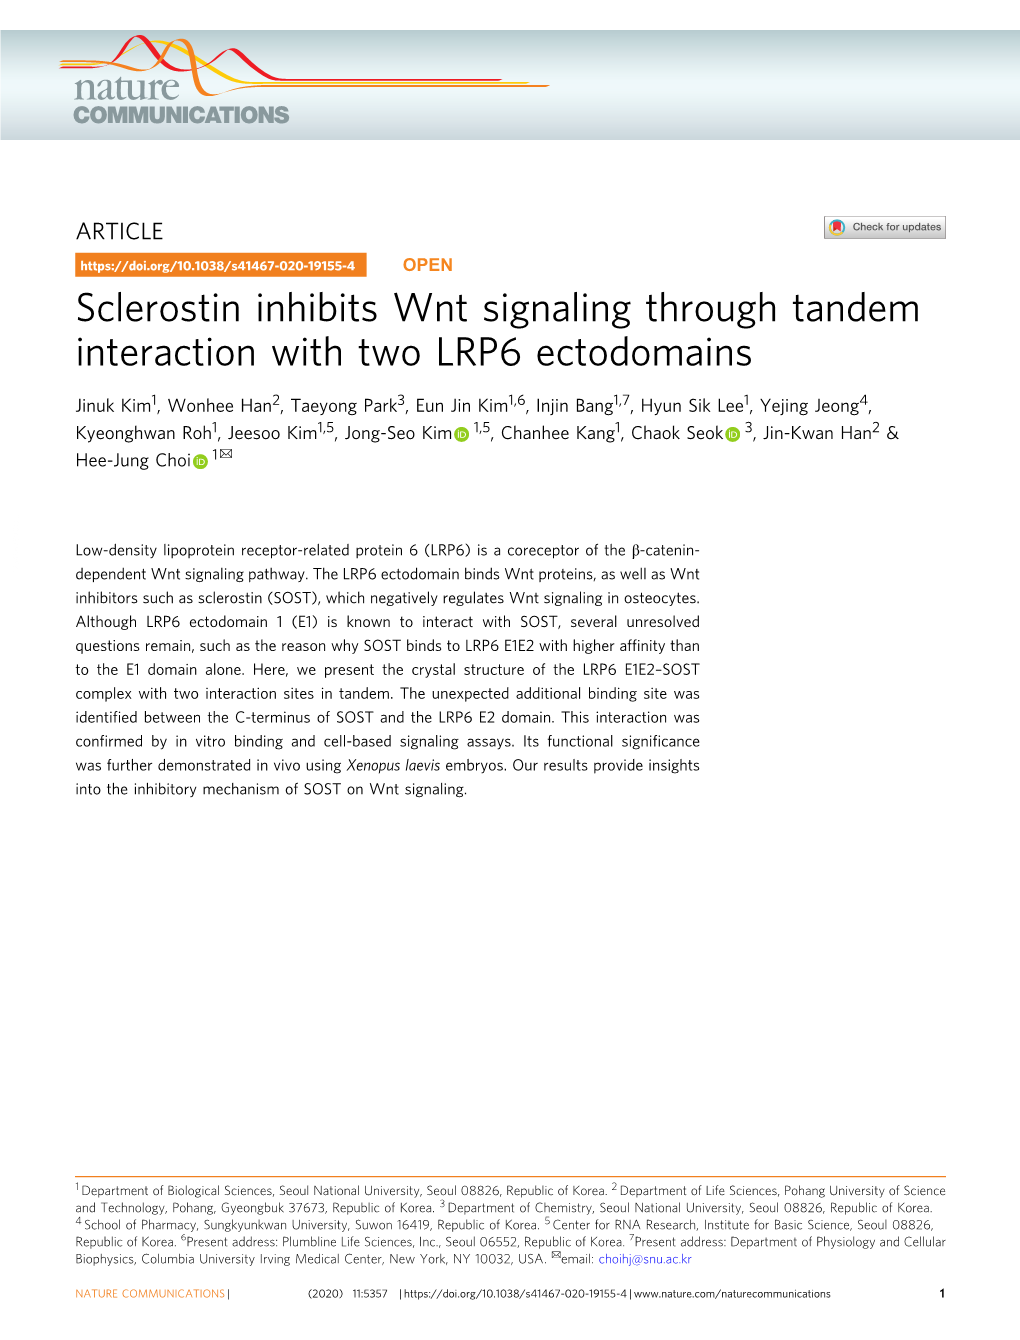 Sclerostin Inhibits Wnt Signaling Through Tandem Interaction with Two LRP6 Ectodomains